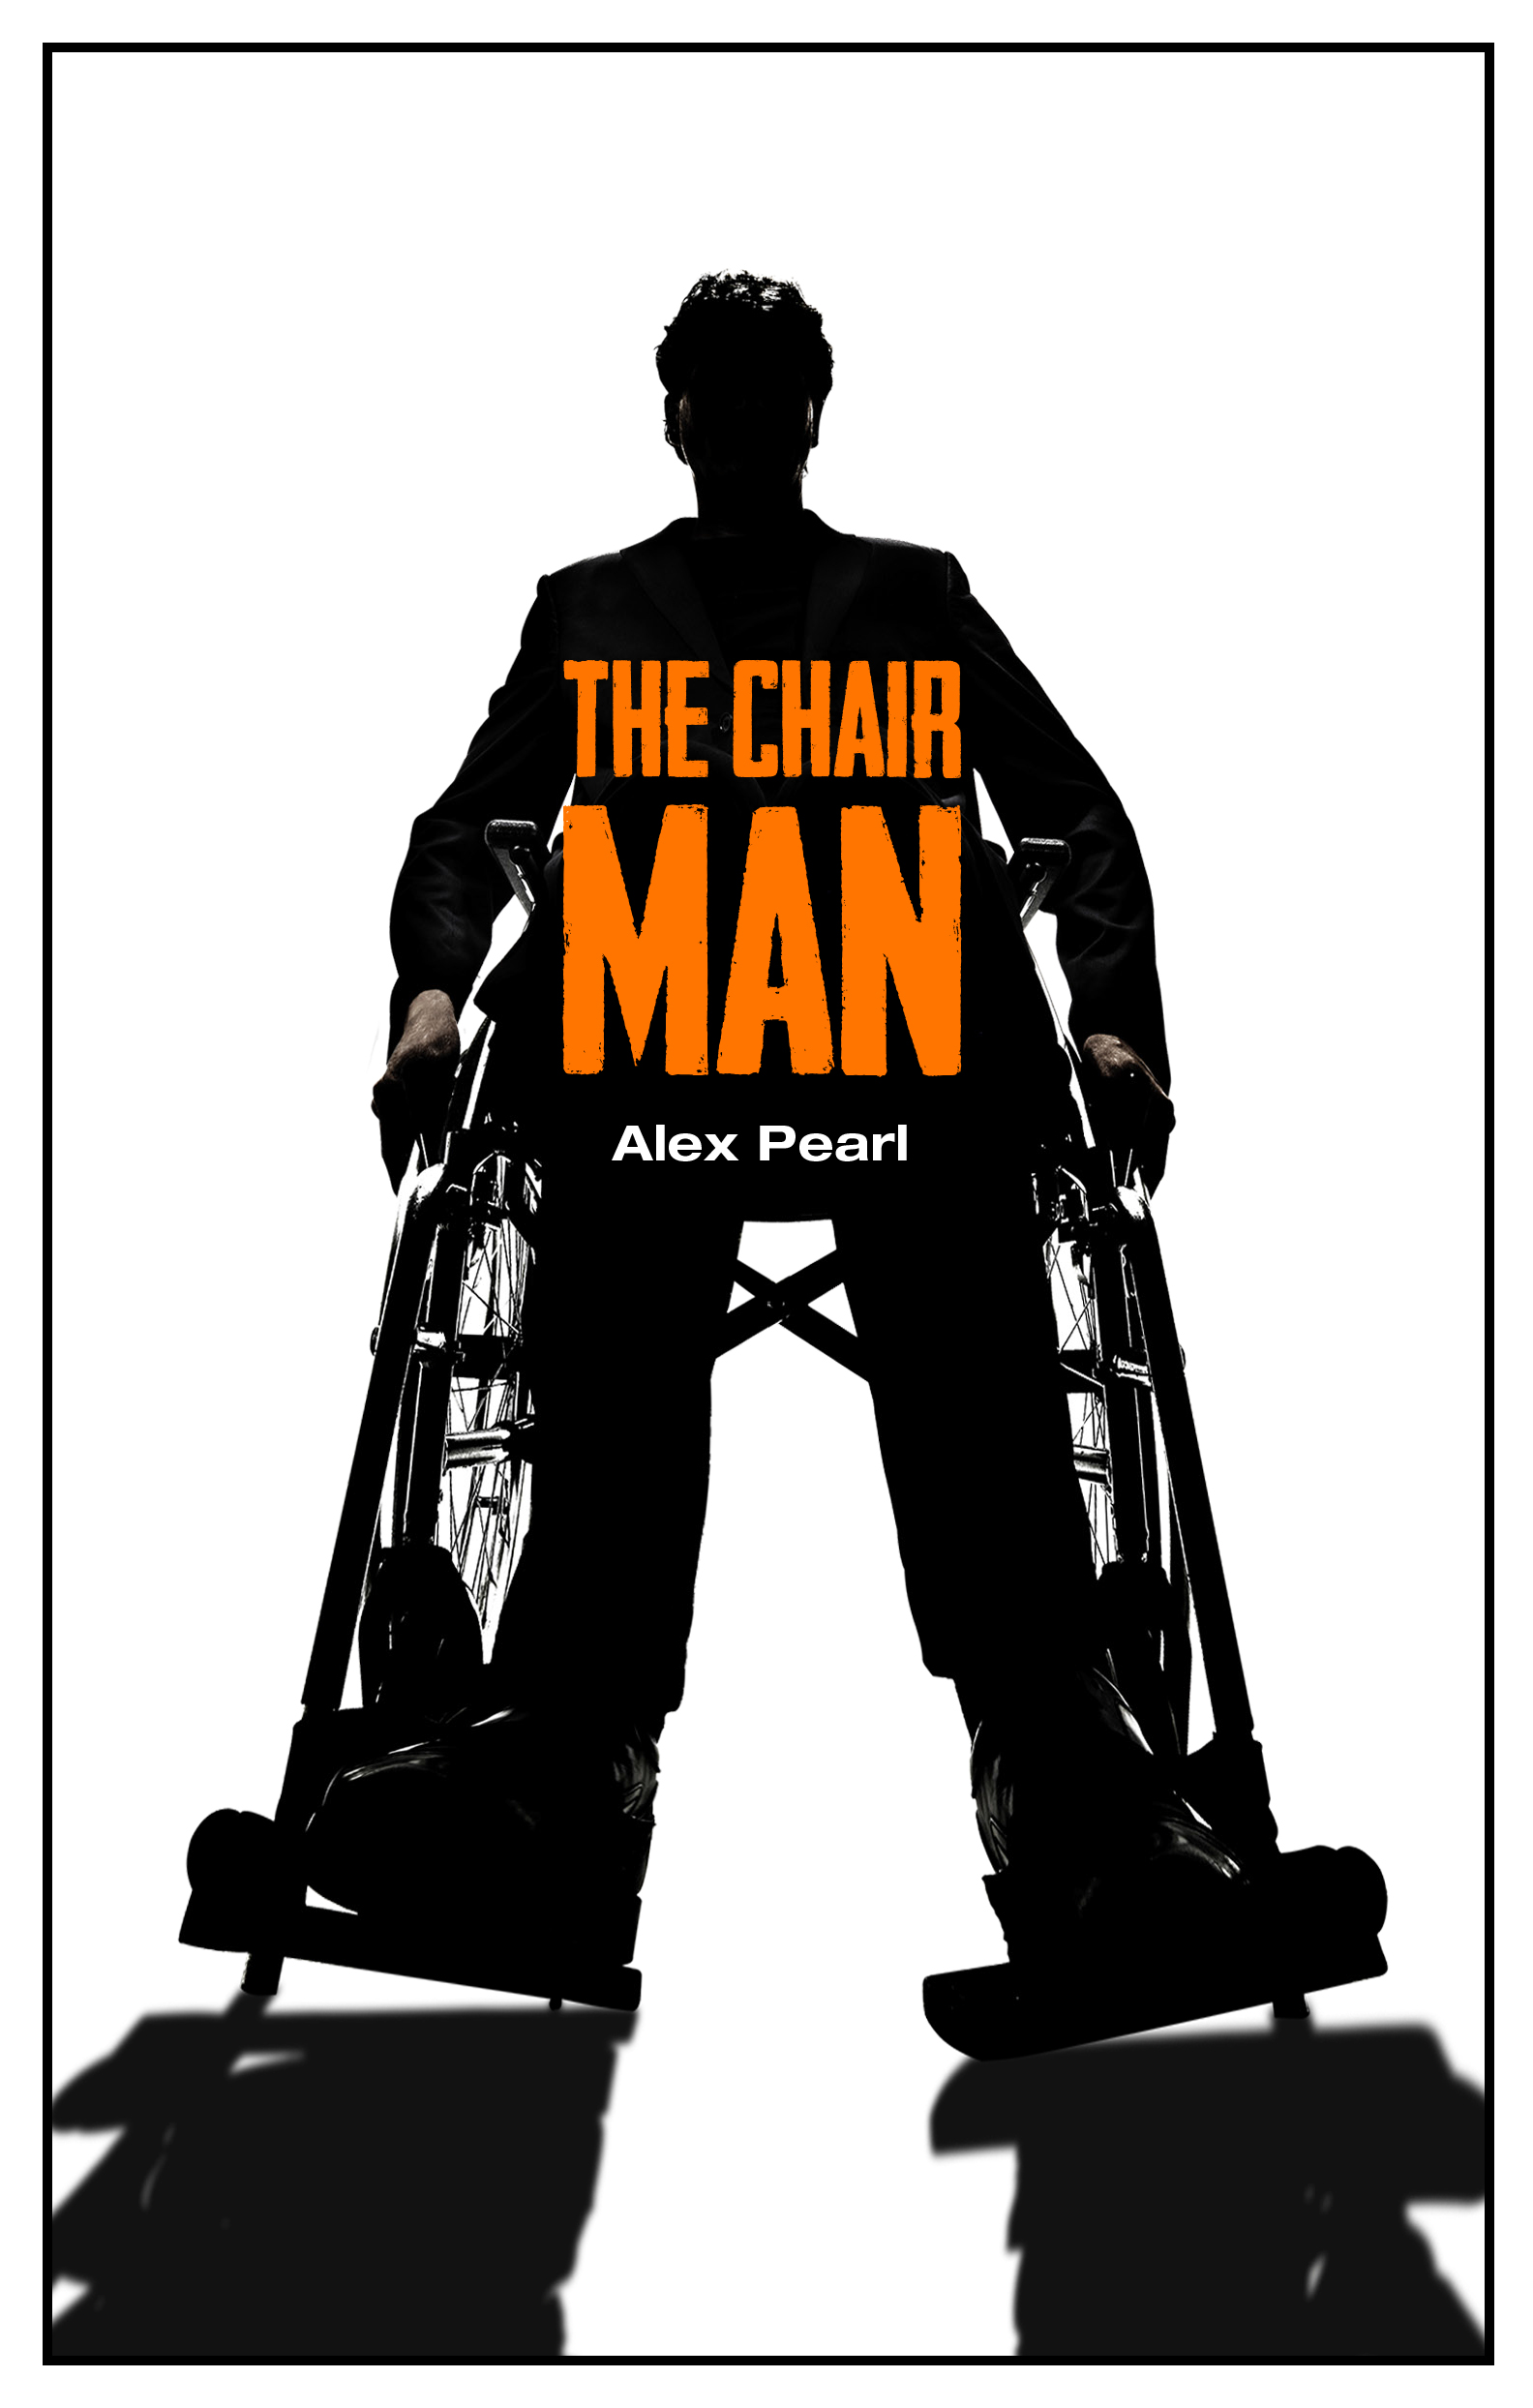 FREE: The Chair Man by Alex Pearl